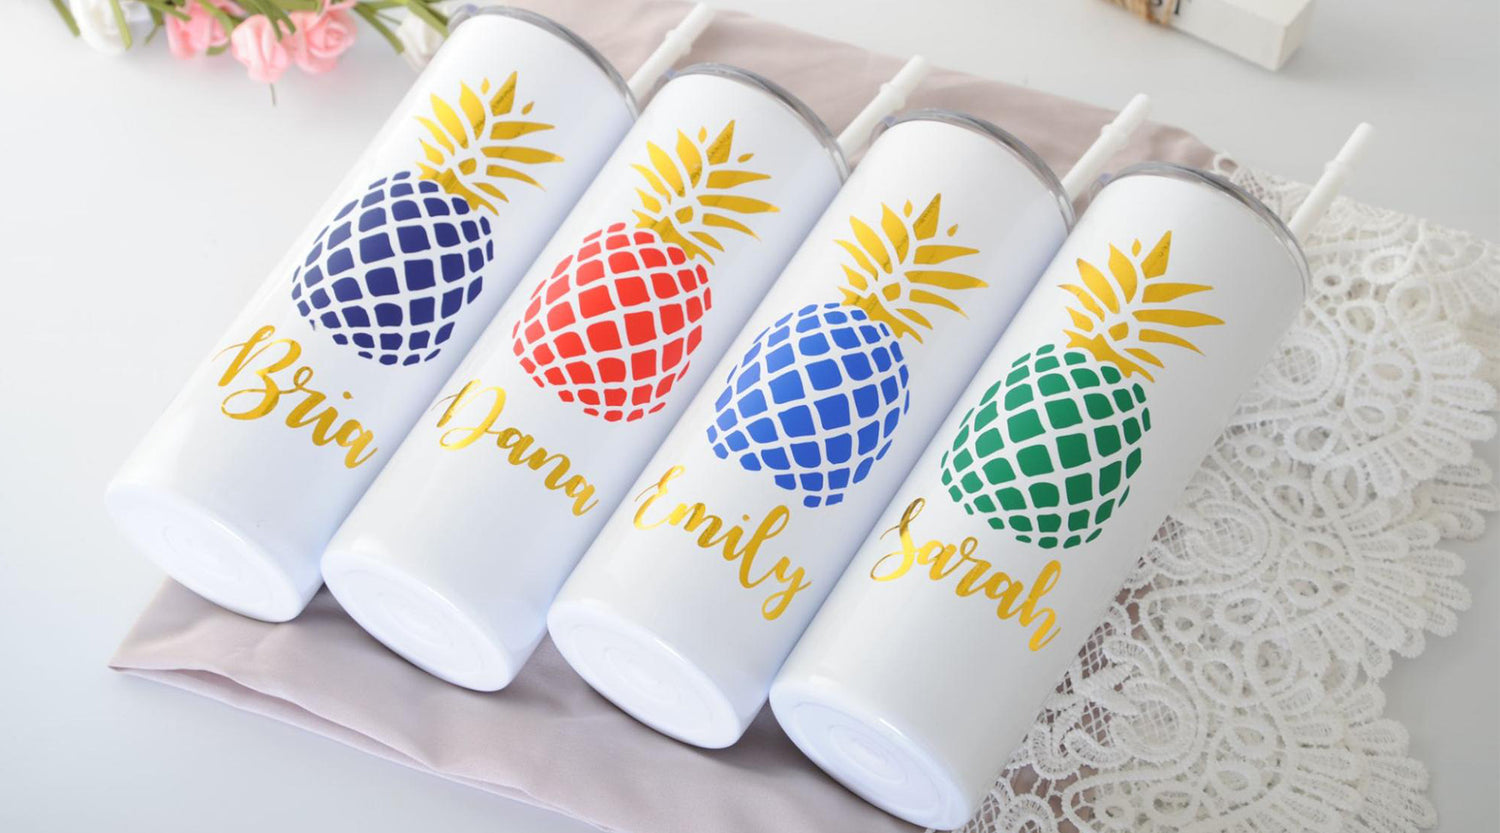 Four white candles with different color pineapples rest on a grey cloth. Each candle has a different name printed below the colorful pineapple..